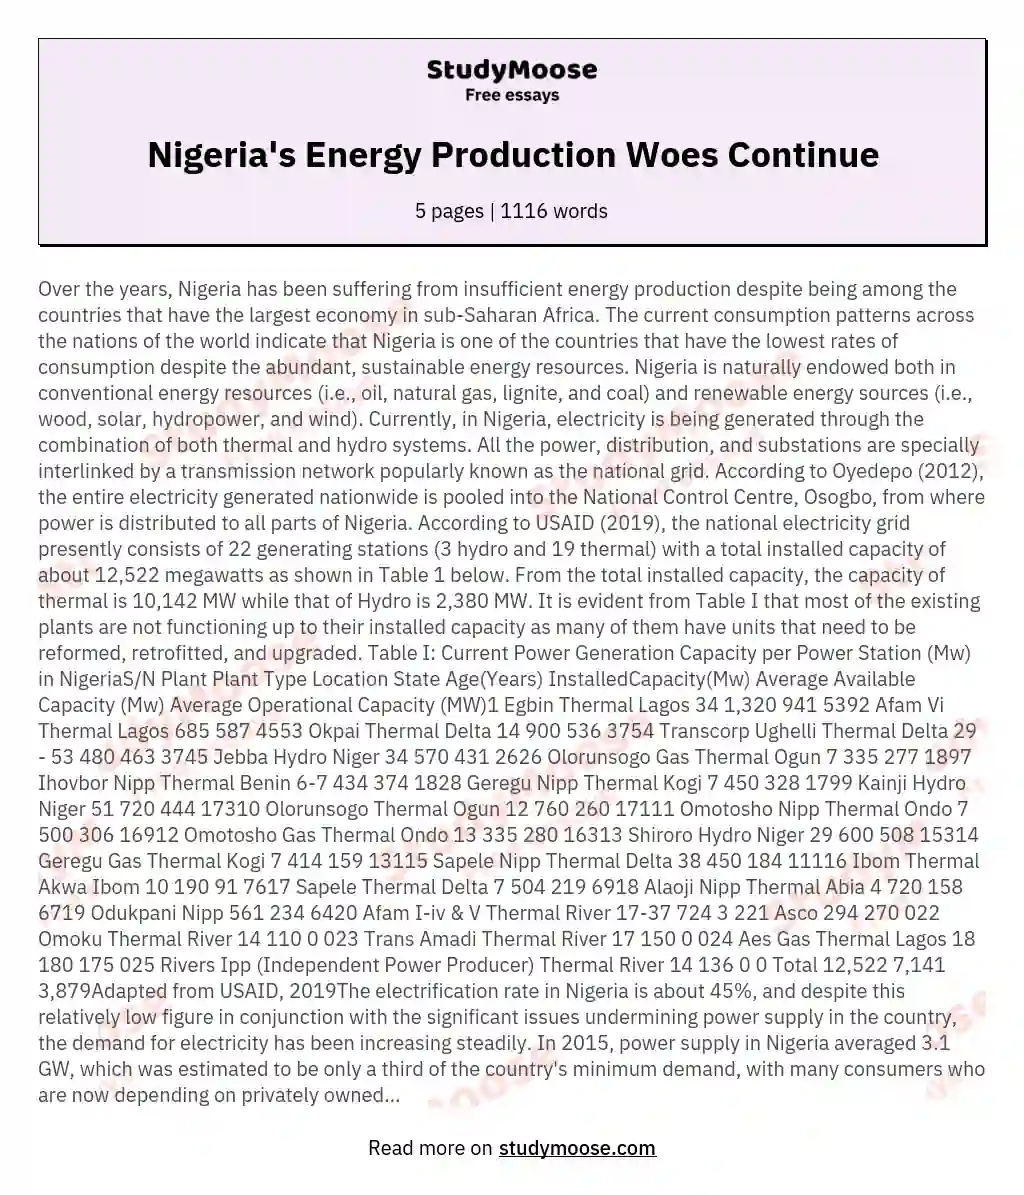 Over the years Nigeria has been suffering from insufficient energy production despite